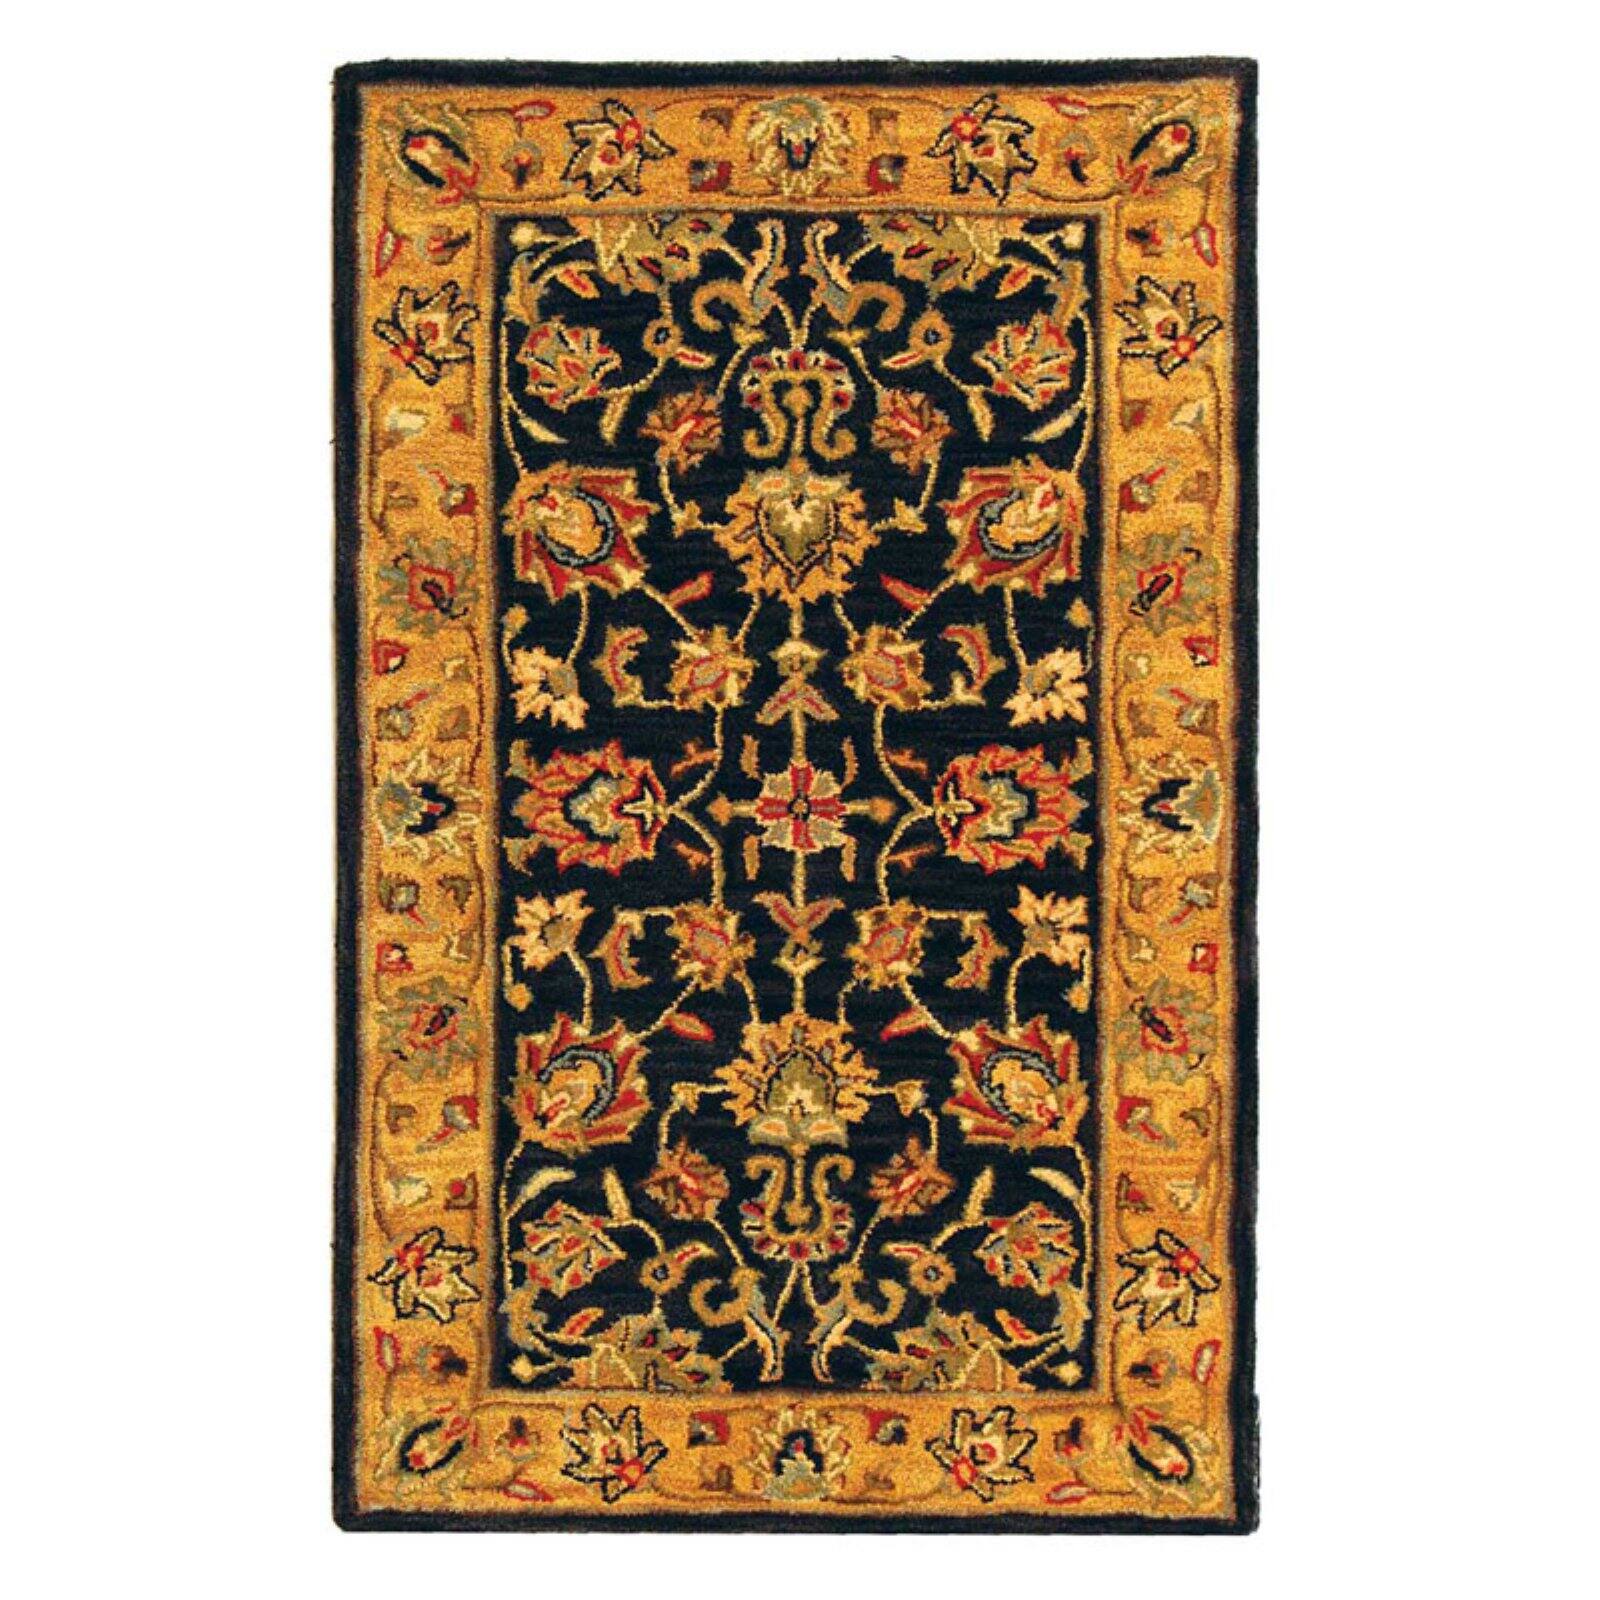 SAFAVIEH Heritage Regis Traditional Wool Area Rug, Charcoal/Gold, 4' x 6' - image 5 of 10